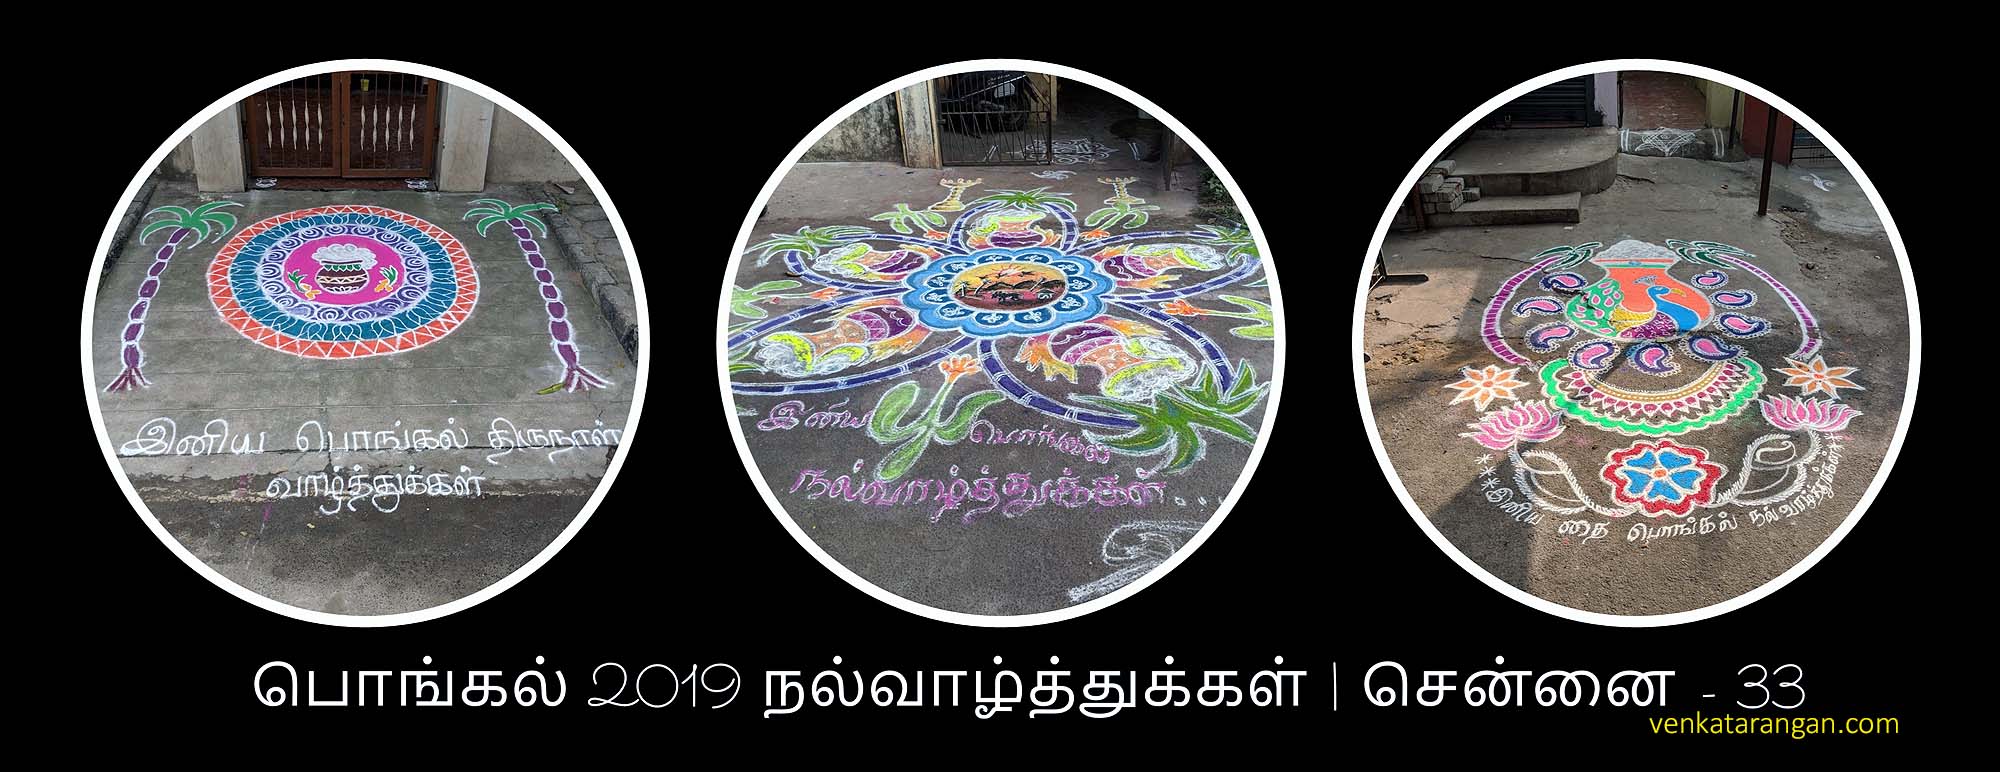 Rice Flour drawings from over 50 houses in my area (Chennai, India)